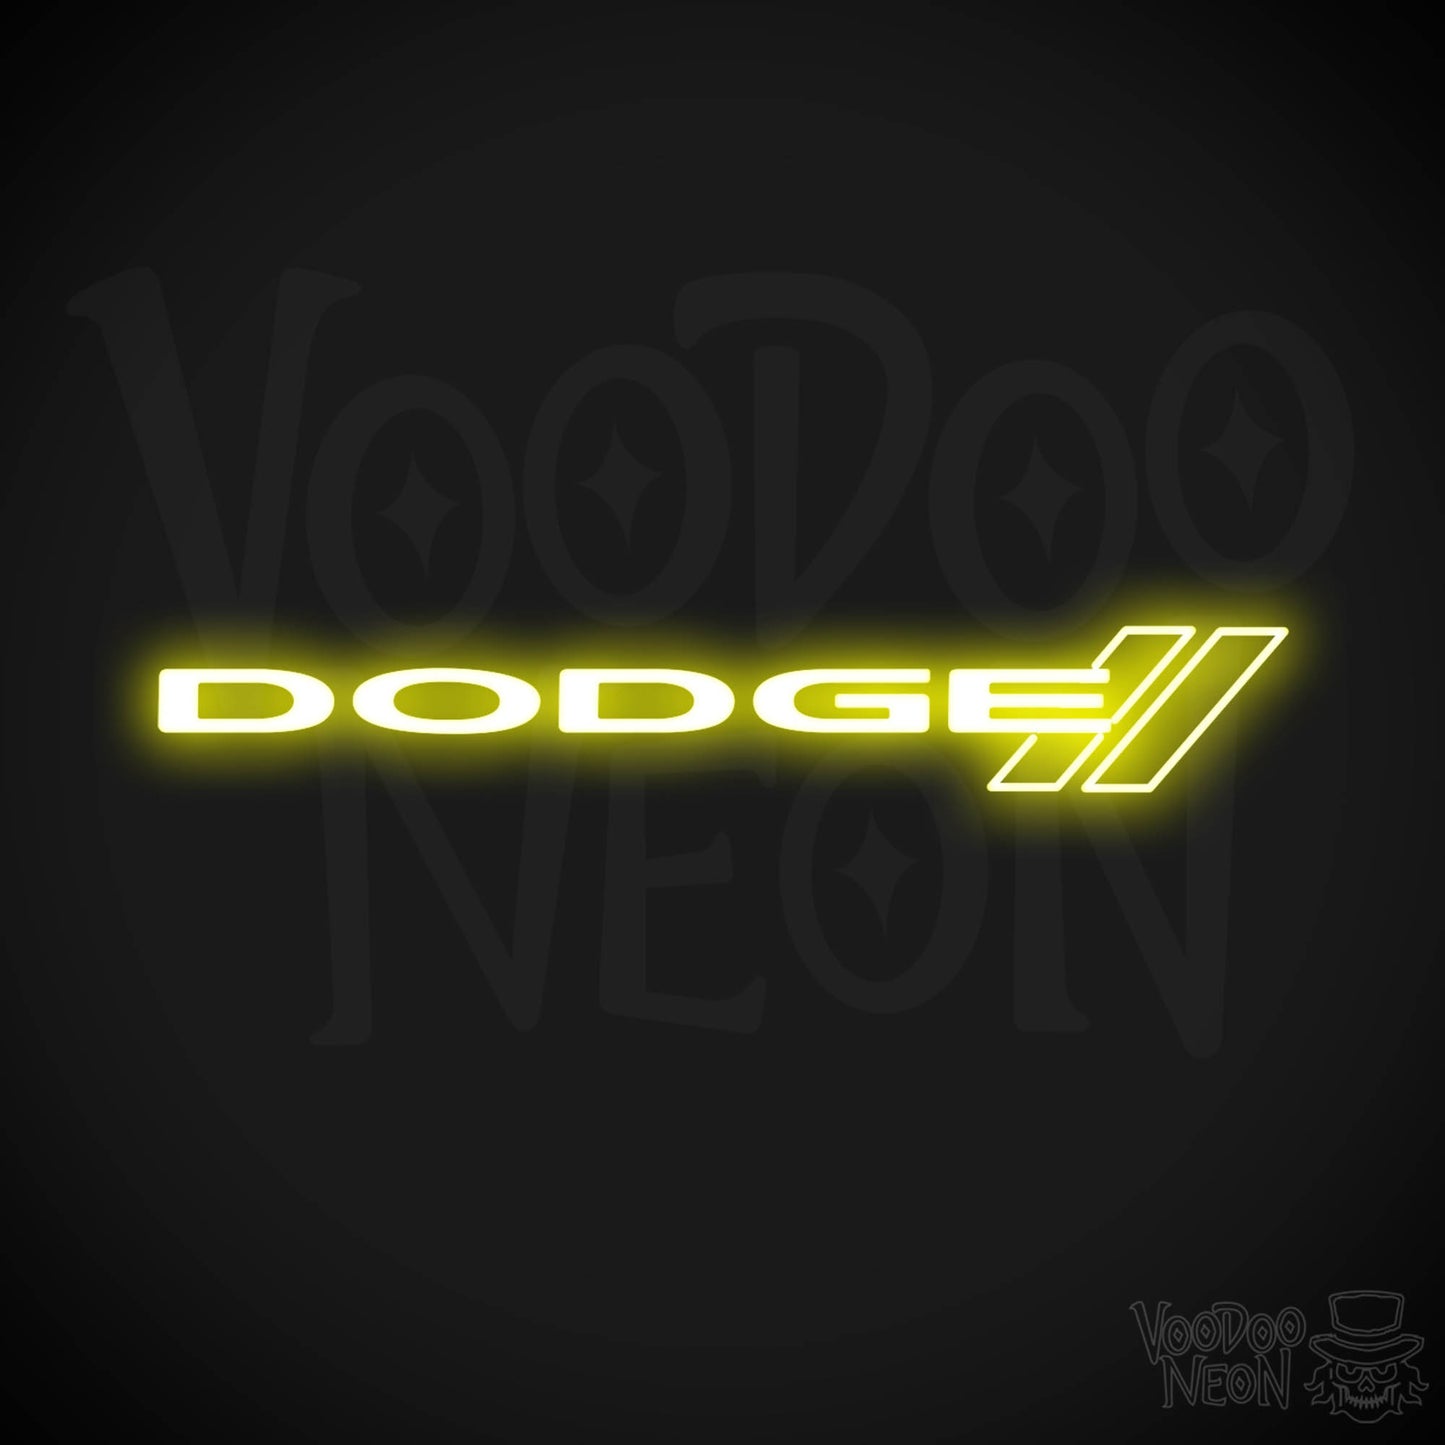 Dodge Neon Sign - Dodge Sign - Dodge Decor - Wall Art - Color Yellow